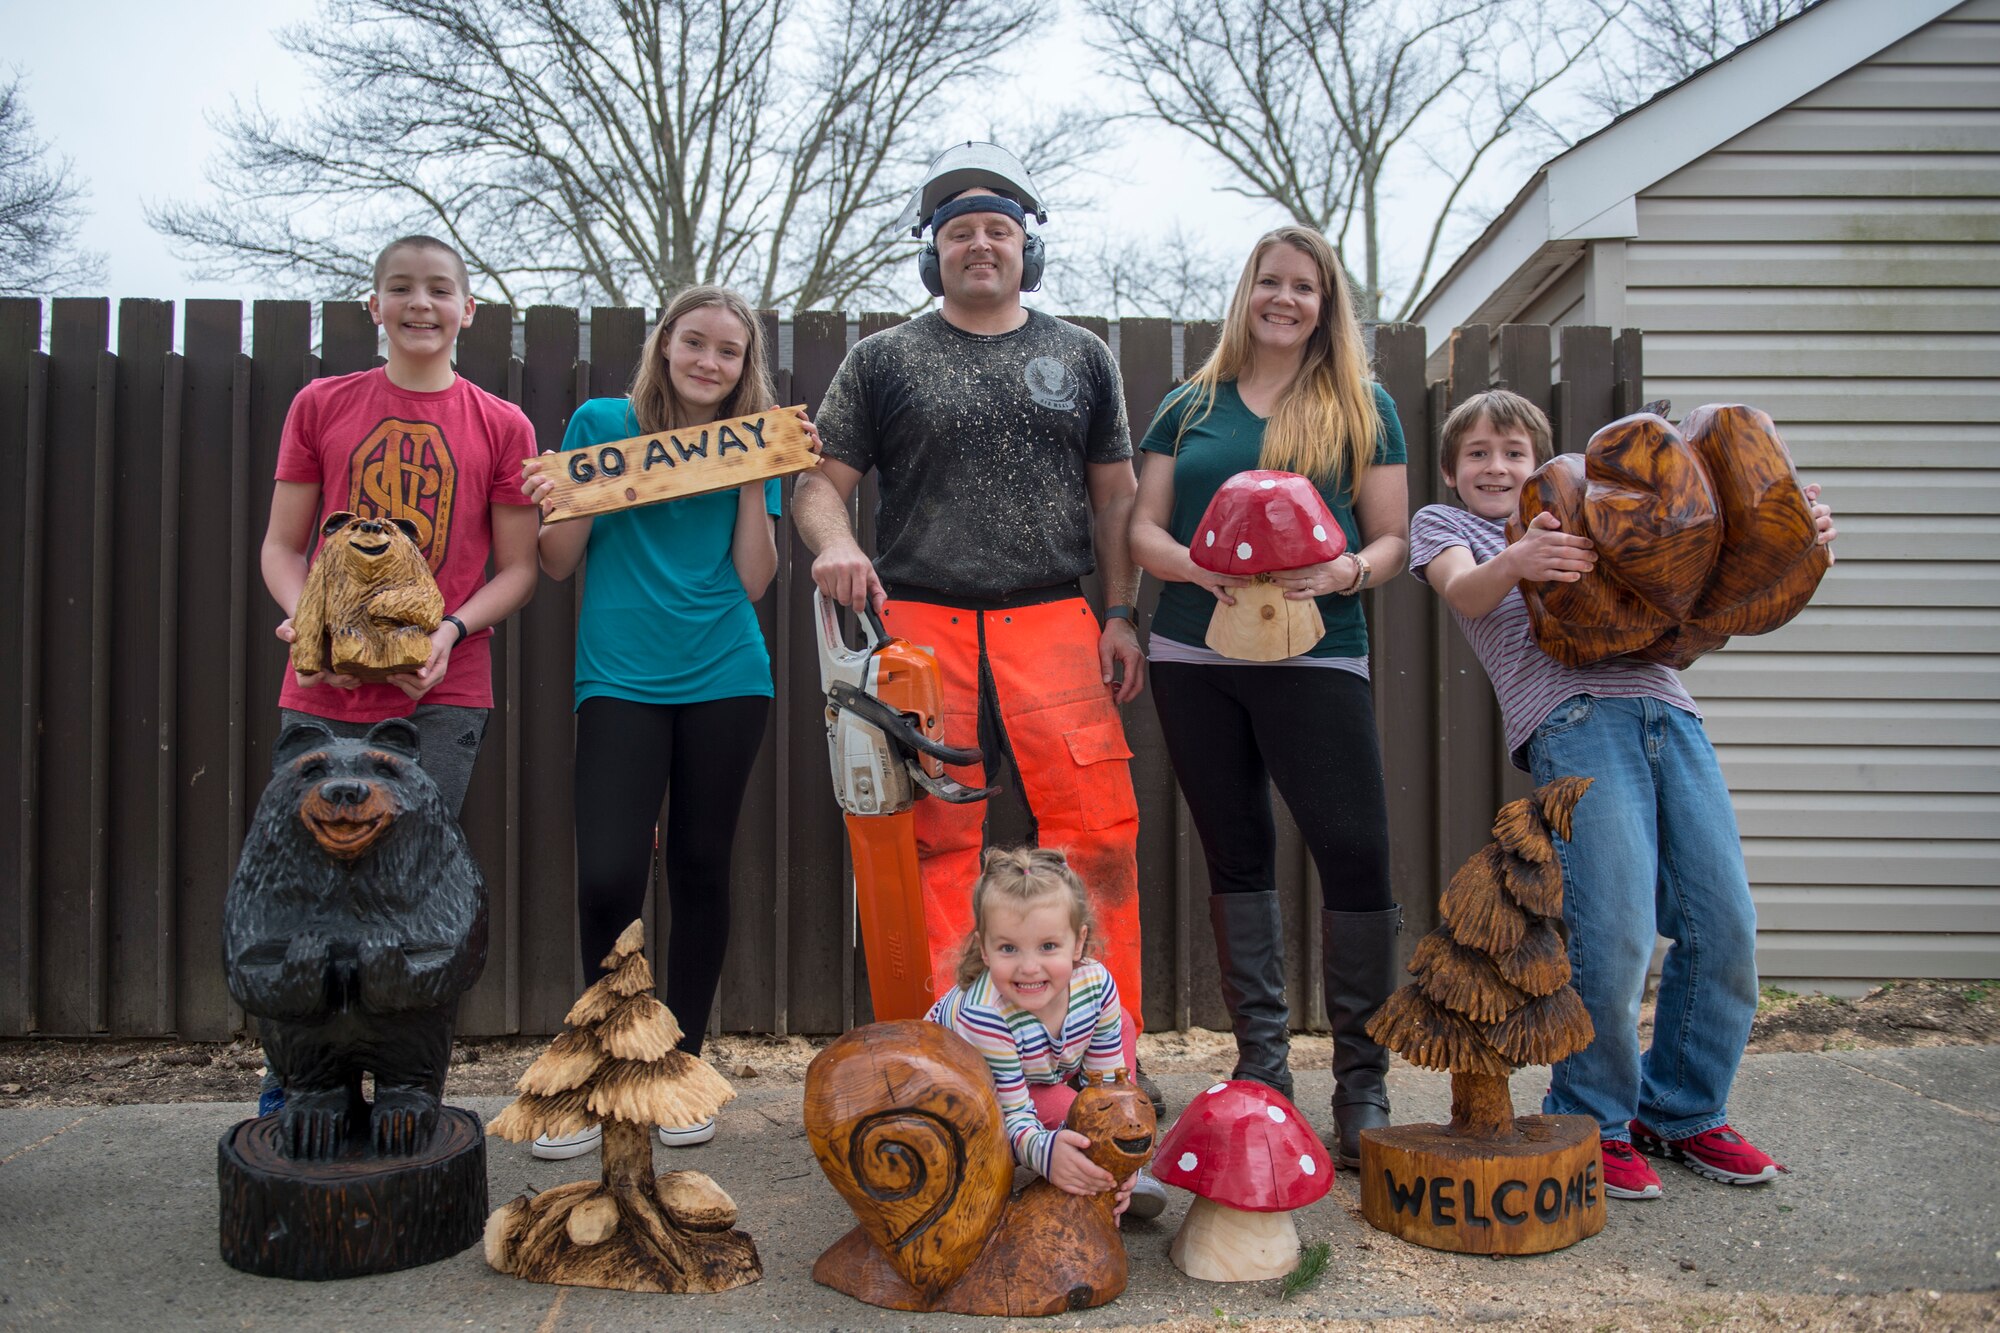 U.S. Air Force Tech. Sgt. Scott Herbert, center, 818th Mobility Support Advisory Squadron air advisor, poses with his family and their favorite carvings that he created with his chainsaw March 12, 2020, Joint Base McGuire-Dix-Lakehurst, New Jersey. Herbert's family chips in to offer support with painting, sanding and blow-torching the sculptures. (U.S. Air Force photo by Staff Sgt. Sarah Brice)